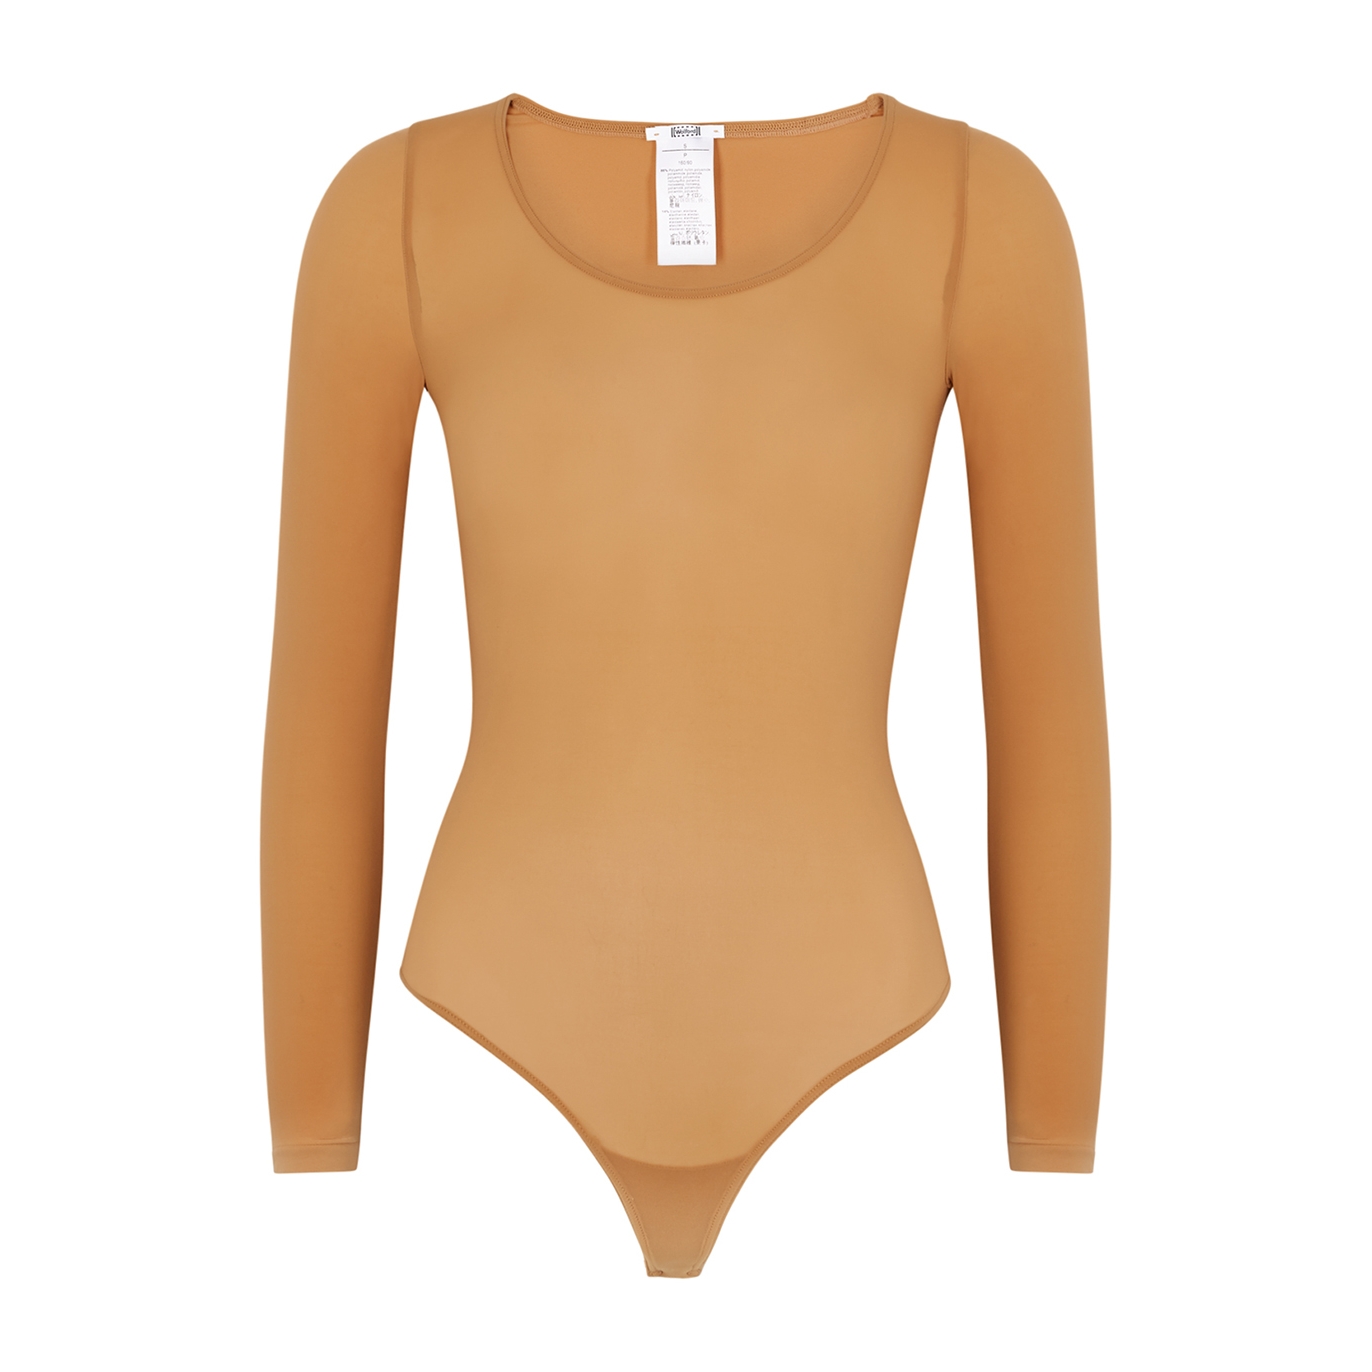 Wolford Buenos Aires Caramel Bodysuit - Nude - S